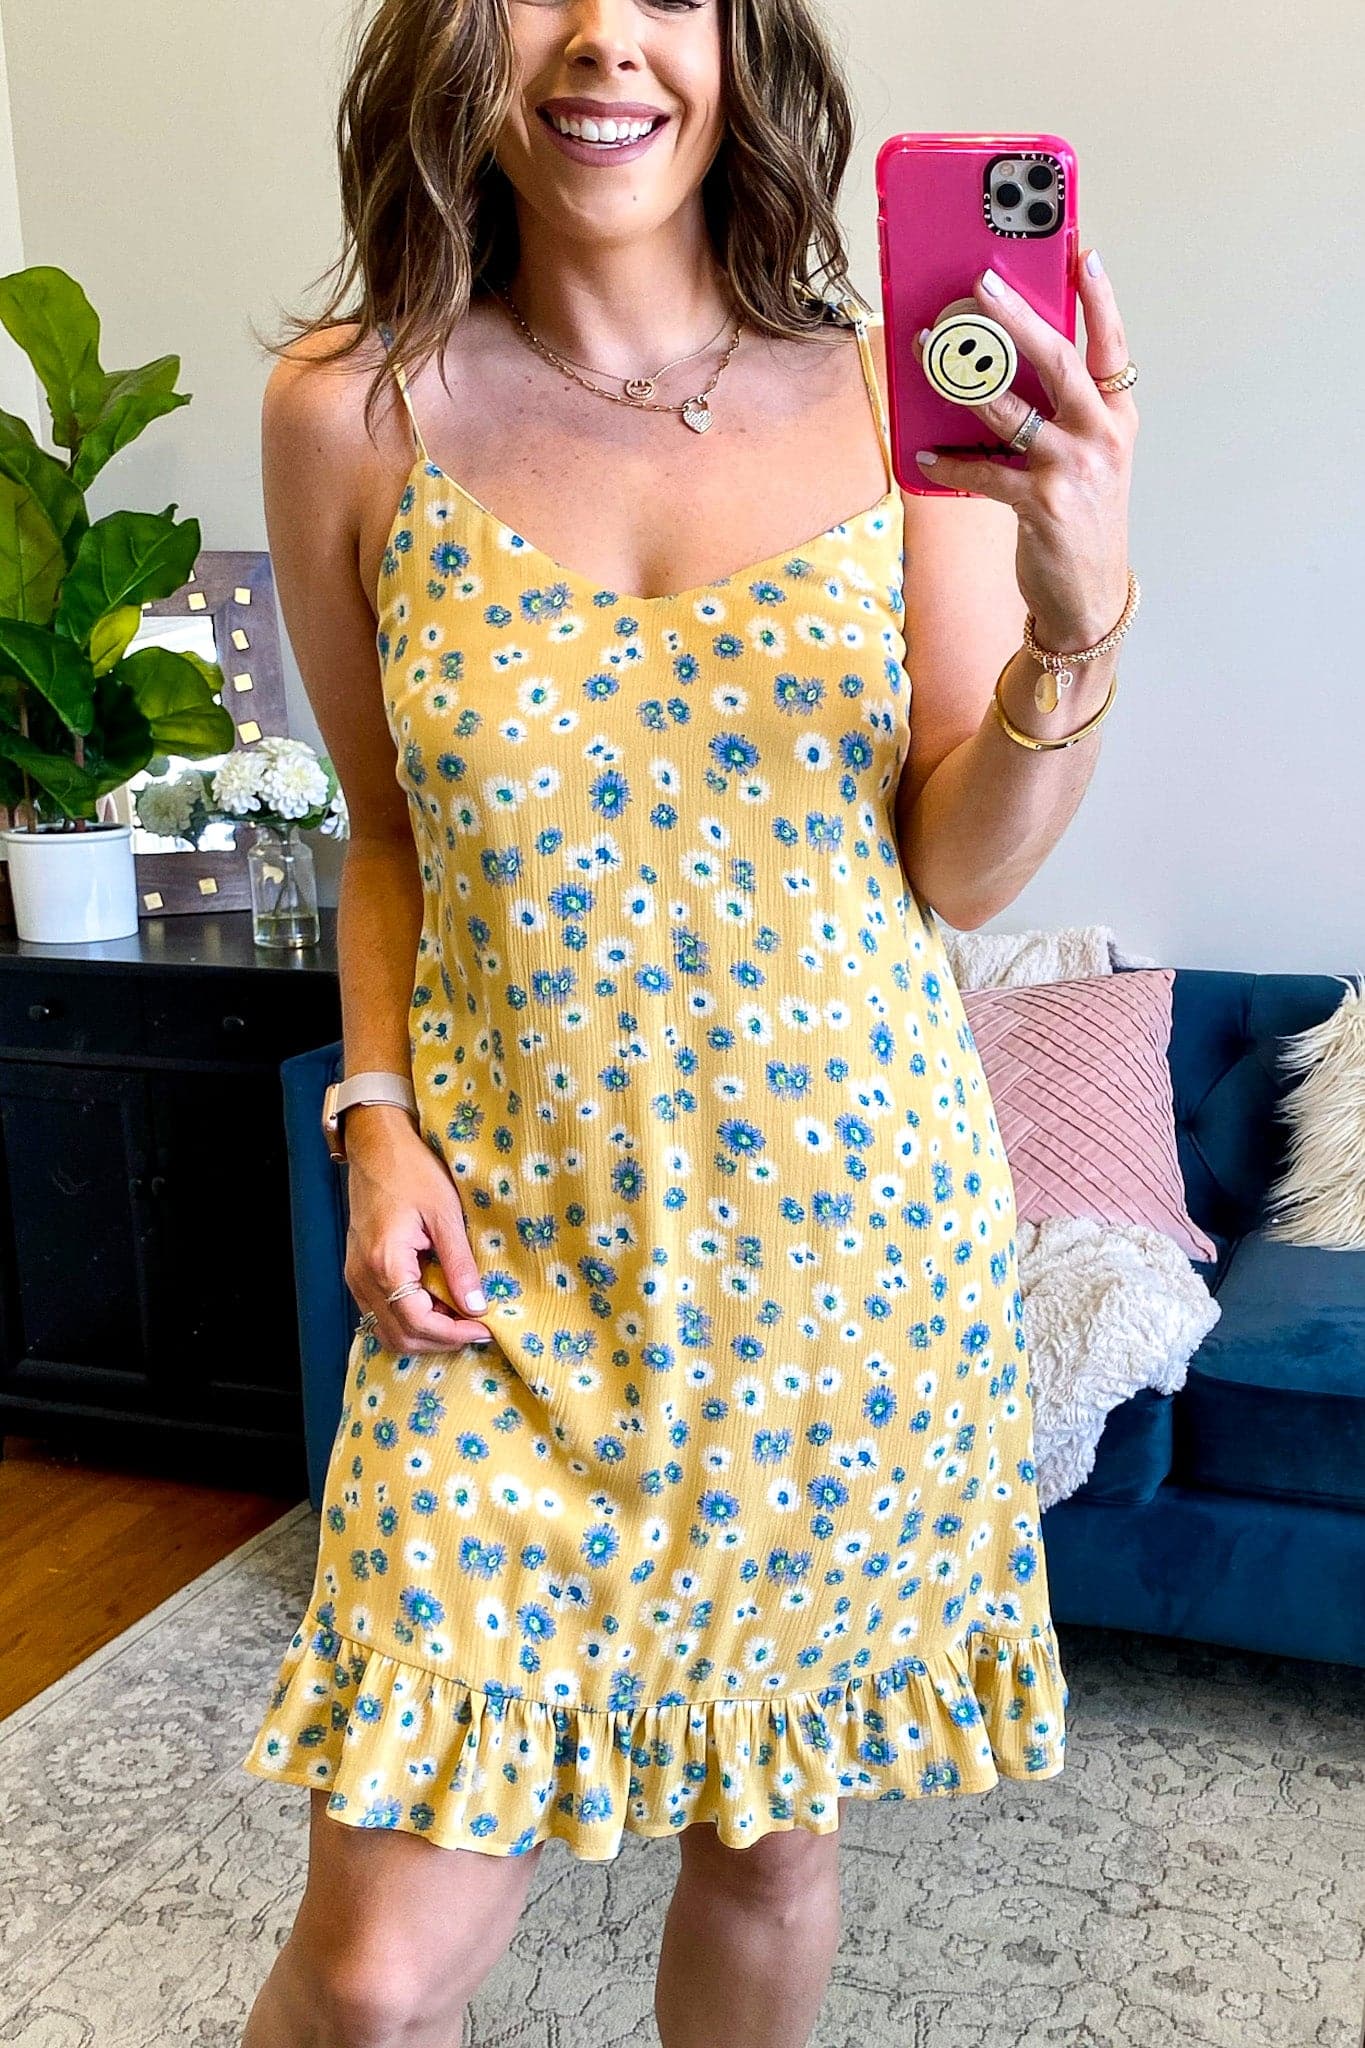  Pick of the Season Floral Print Cami Dress - FINAL SALE - Madison and Mallory